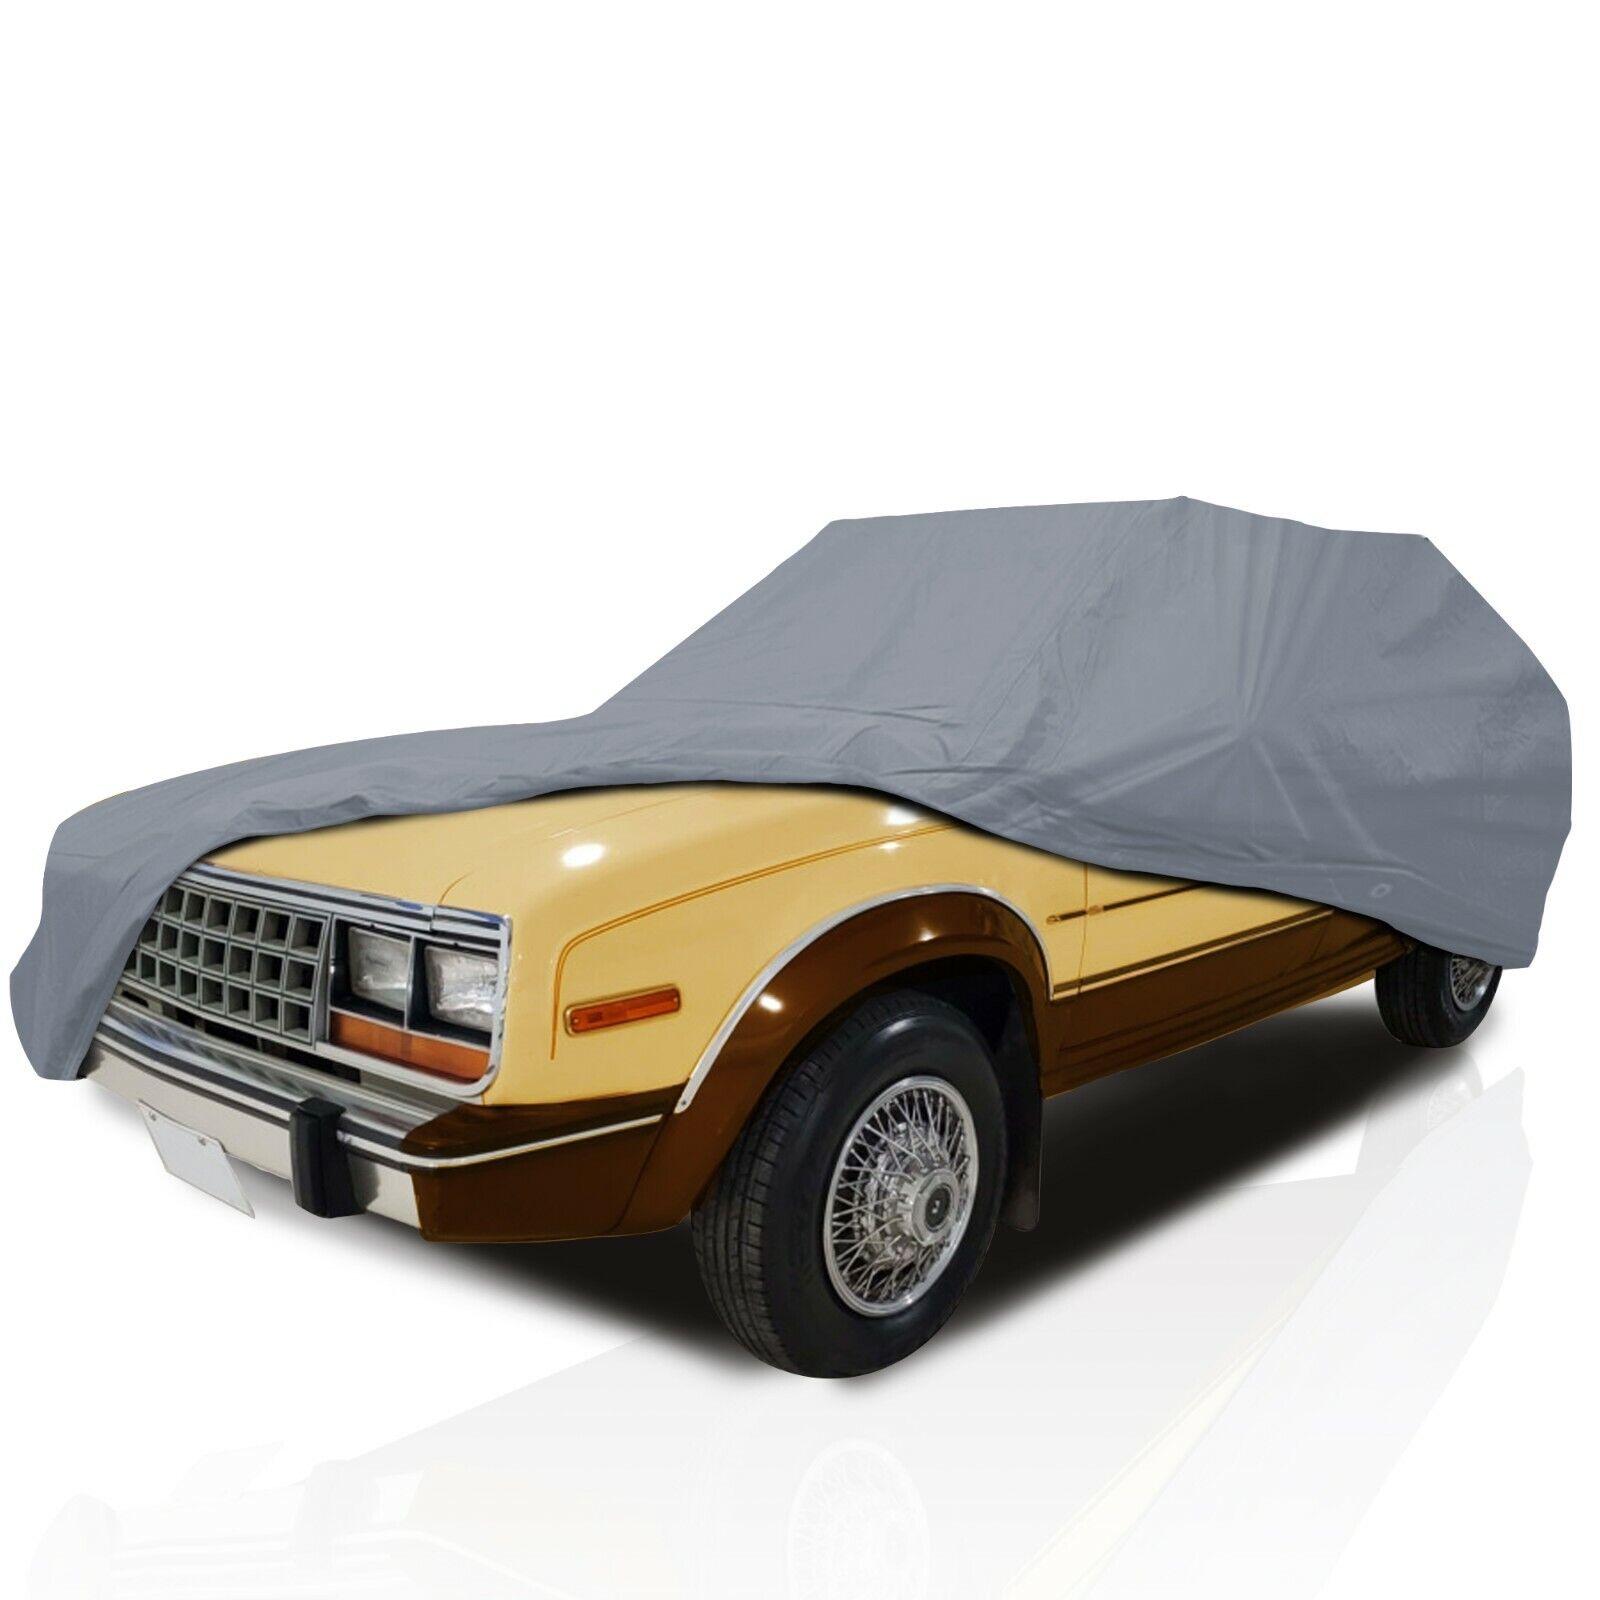 [CCT] 4 Layer Car Cover For American Motors AMC Eagle 1980 1981 1982 1983-1988